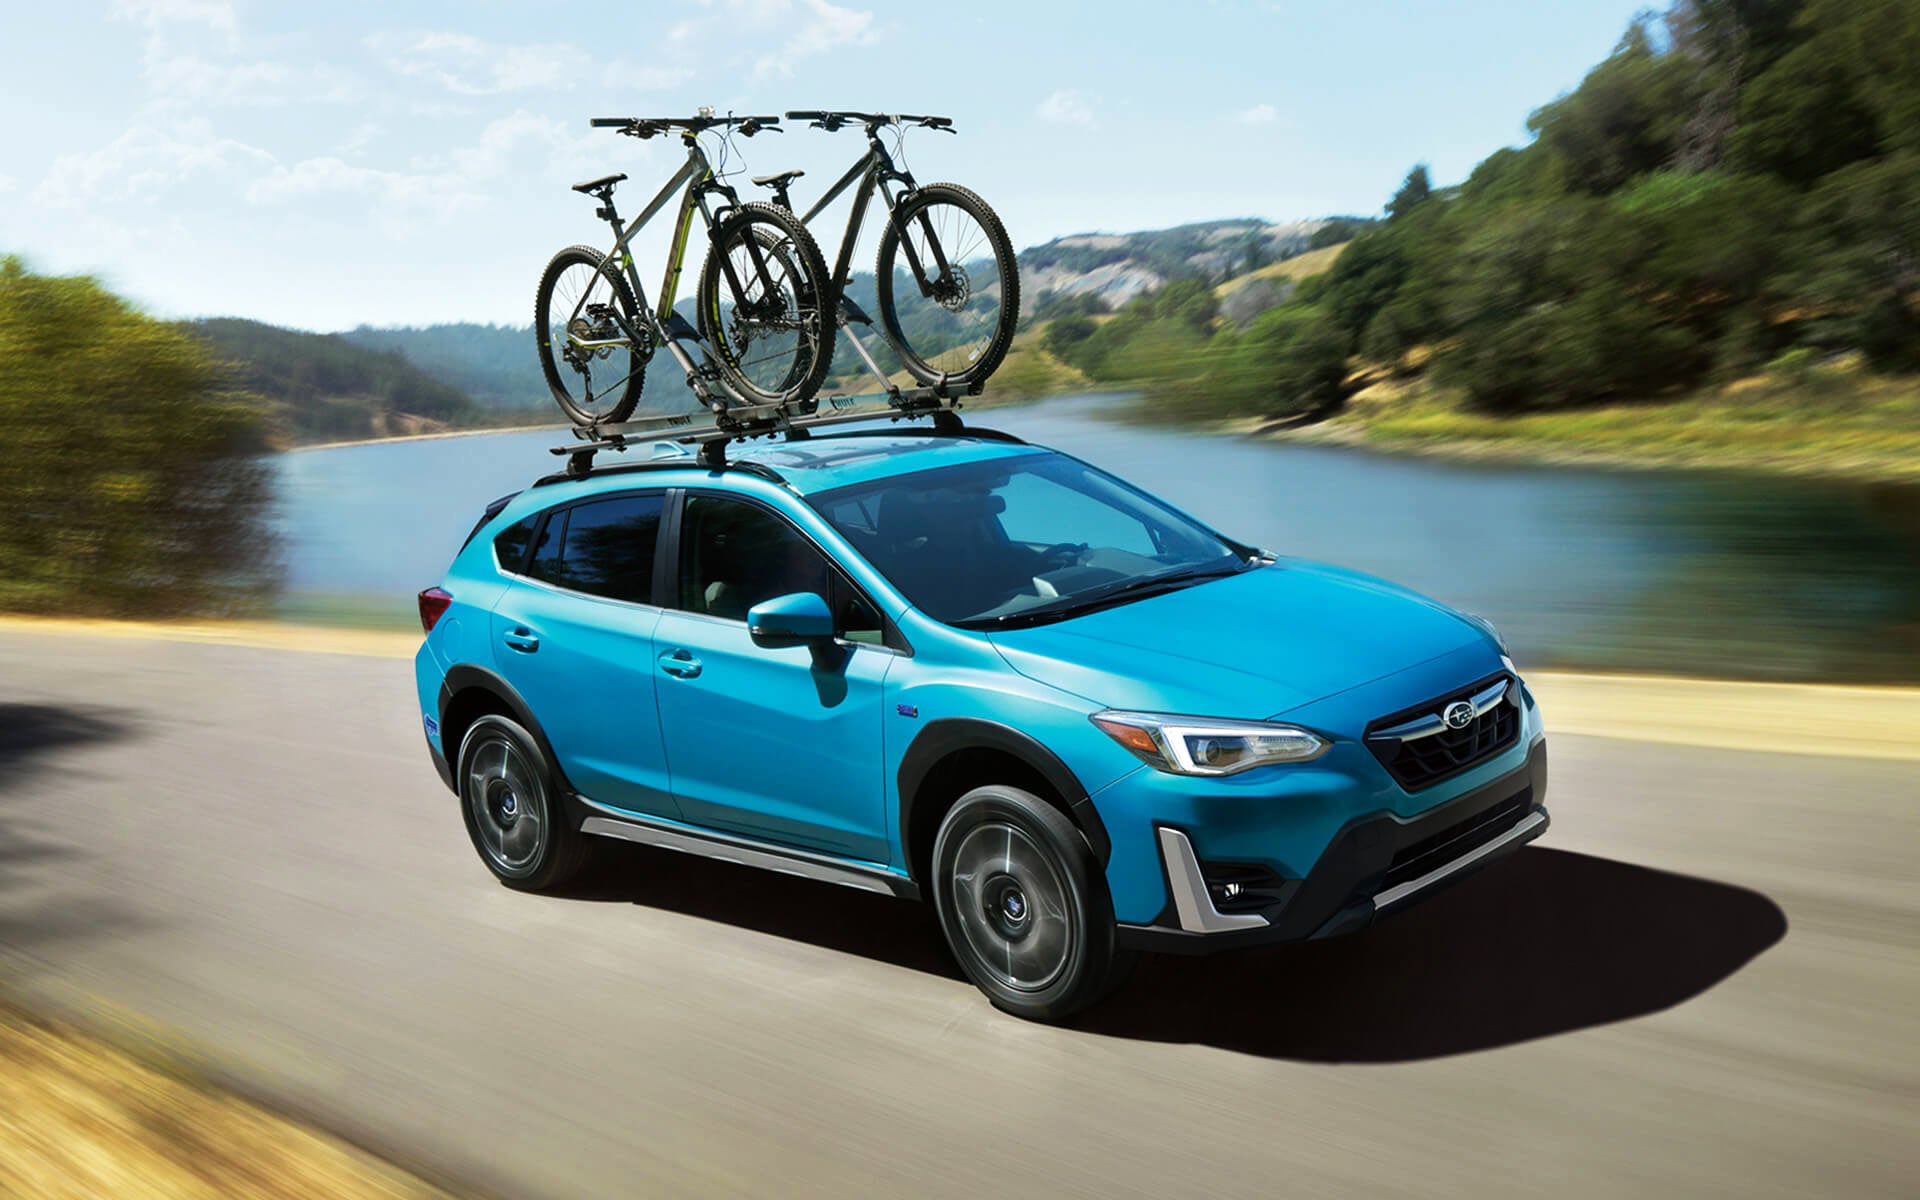 A blue Crosstrek Hybrid with two bicycles on its roof rack driving beside a river | Neil Huffman Subaru in Louisville KY